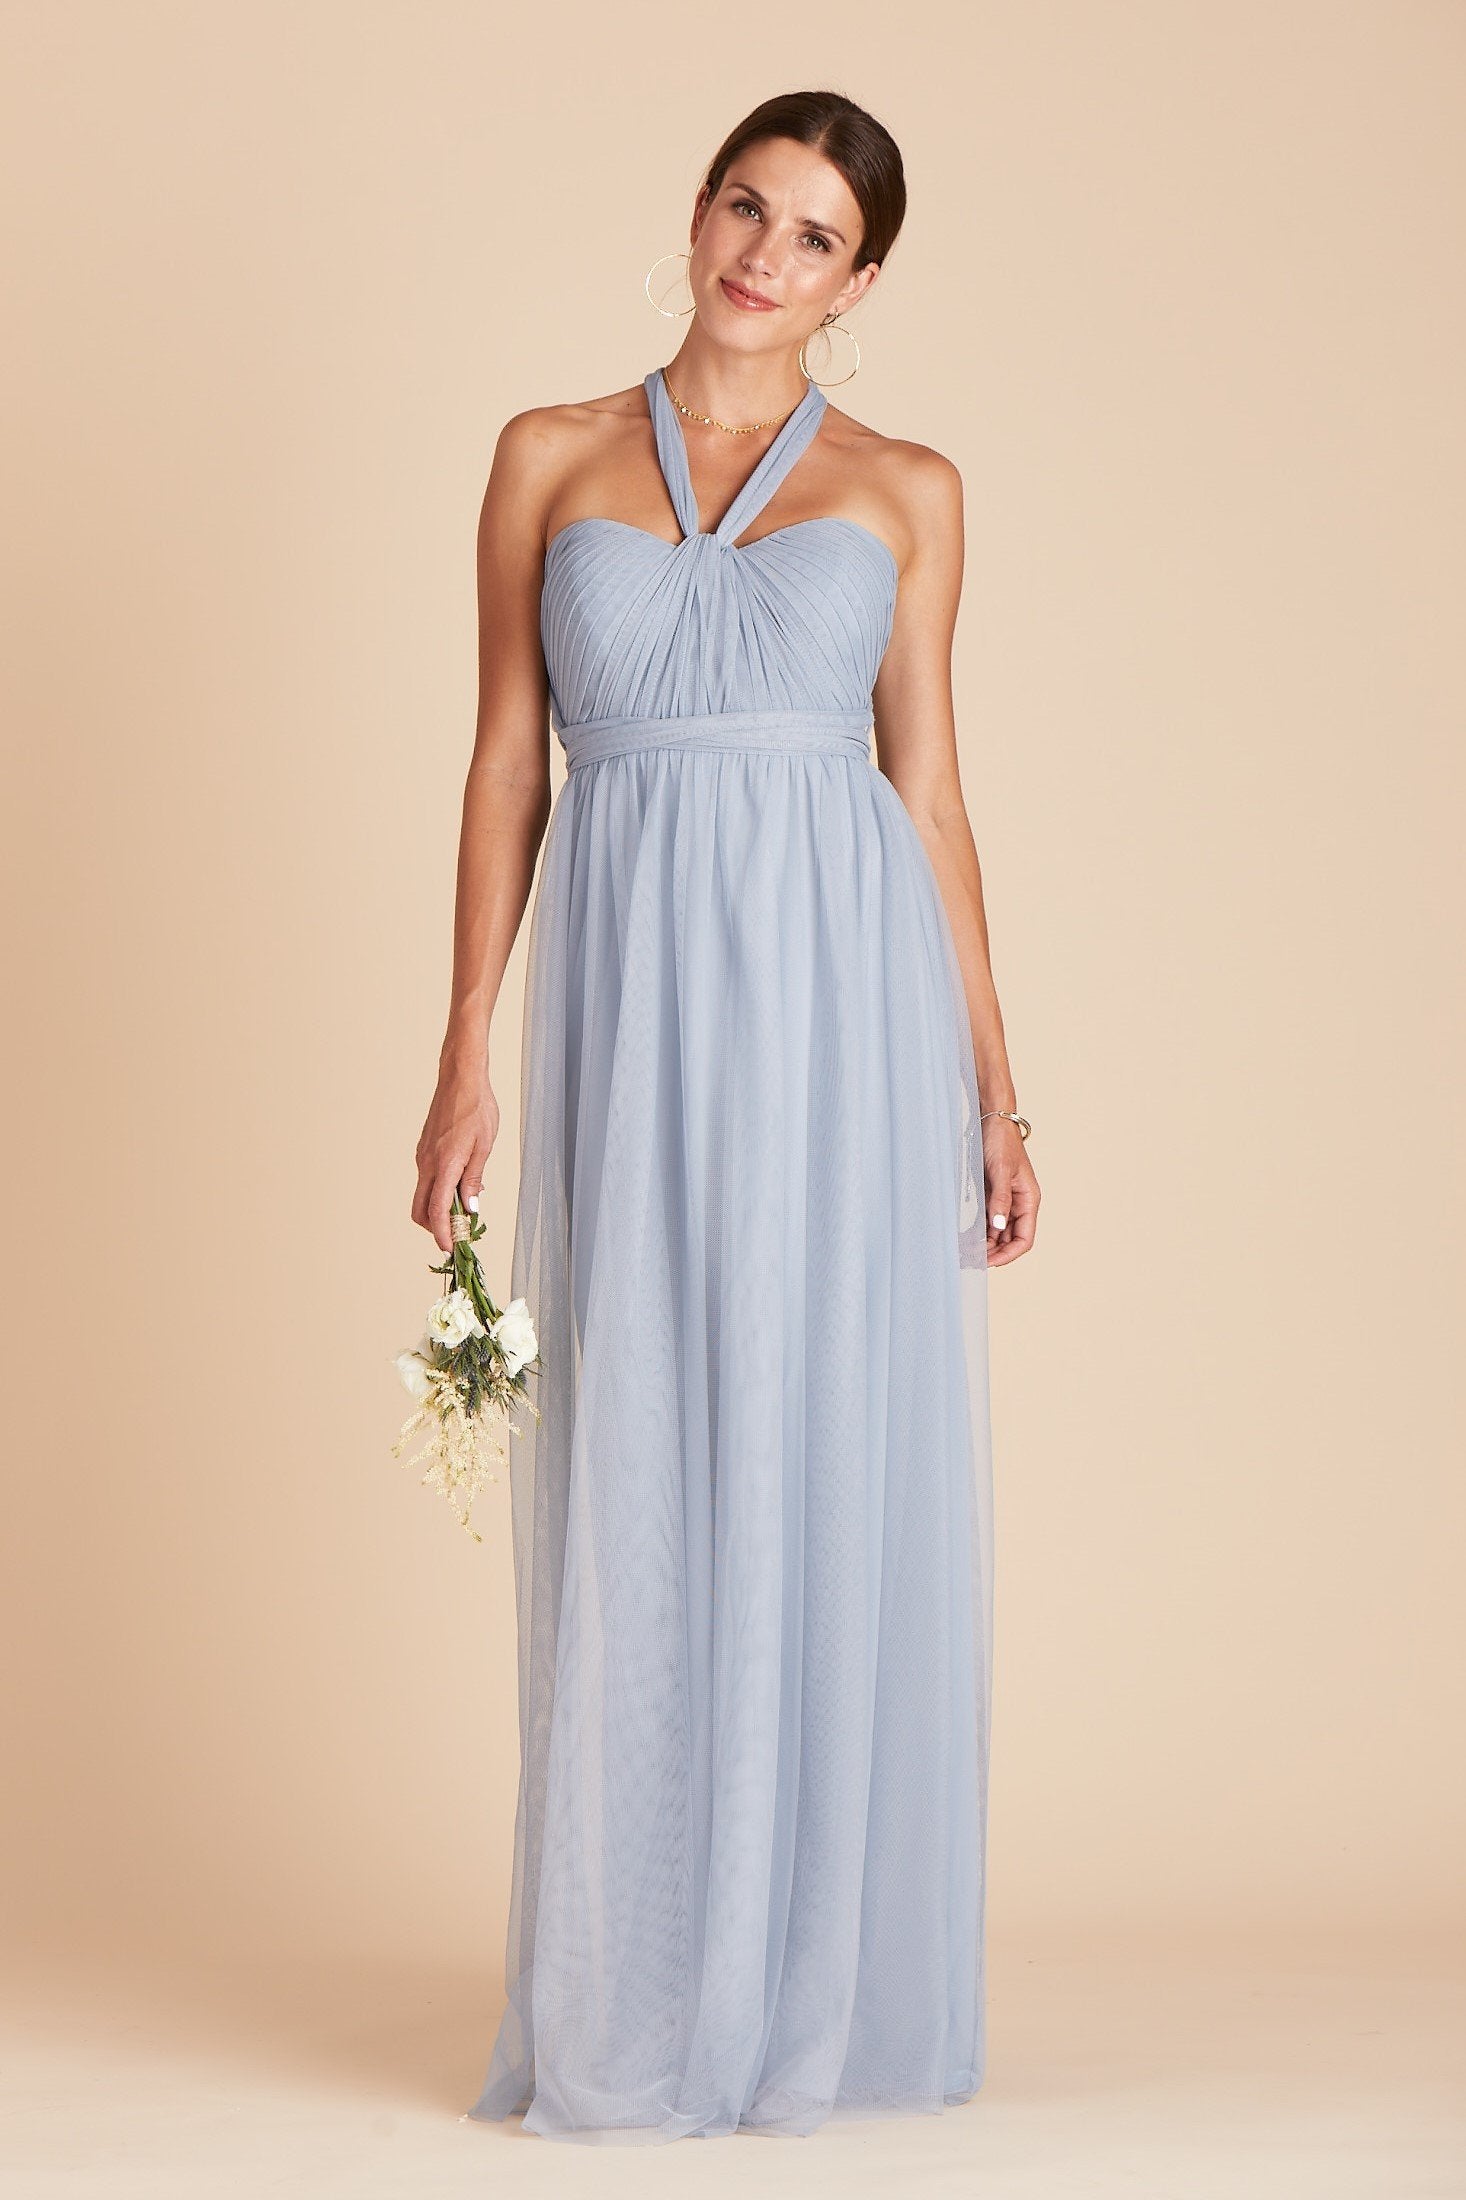 Christina convertible bridesmaid dress in dusty blue tulle by Birdy Grey, front view